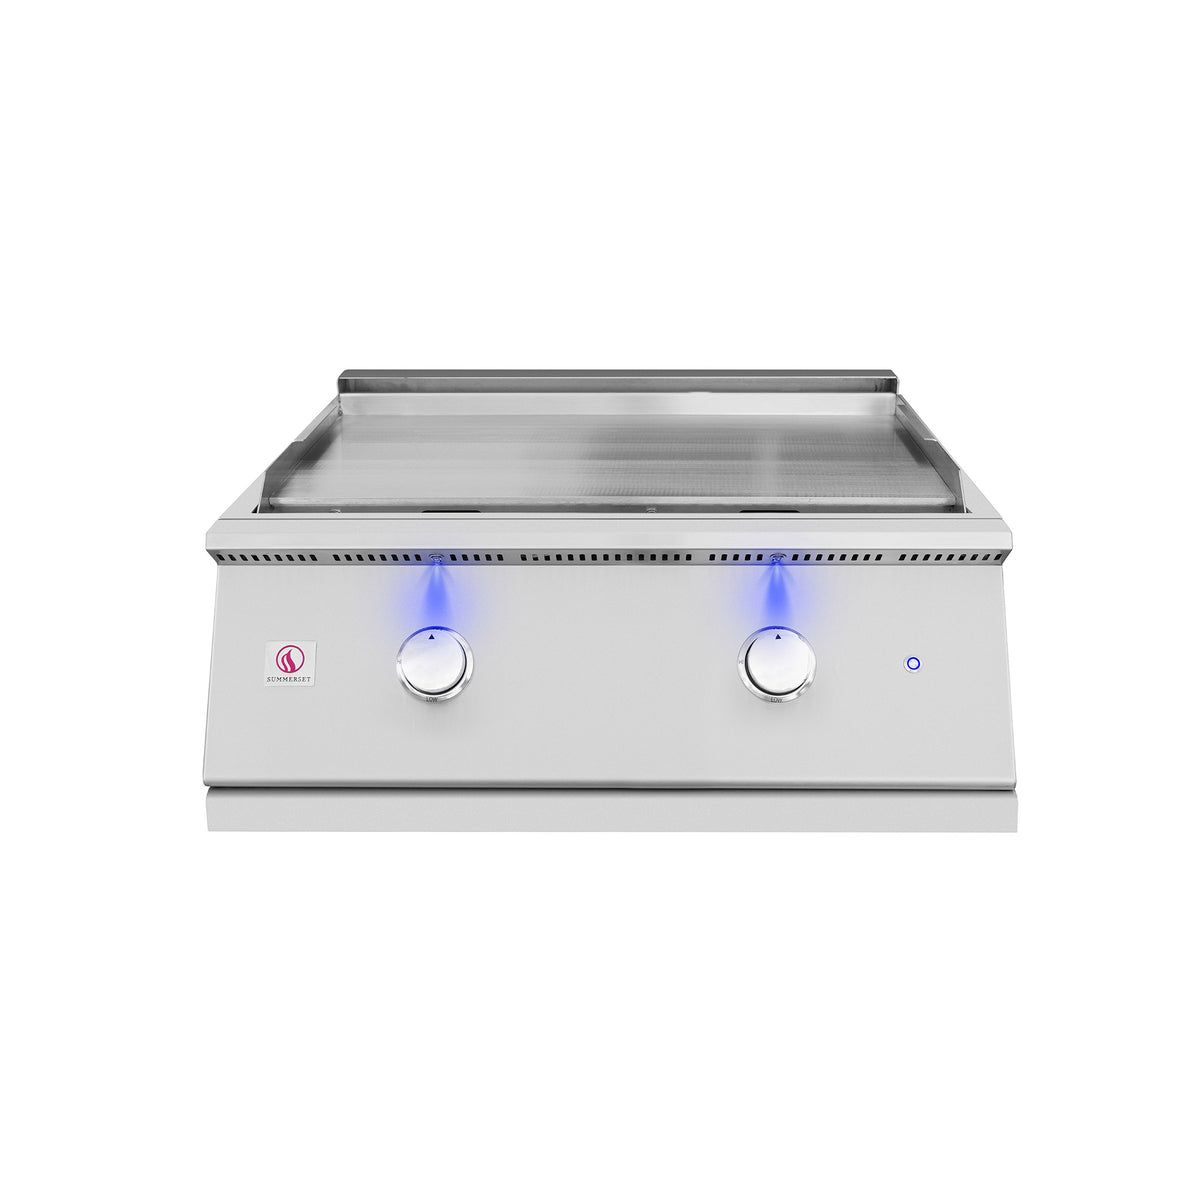 Summerset Sizzler Pro 32" Built-in Grill 30" Gas Griddle